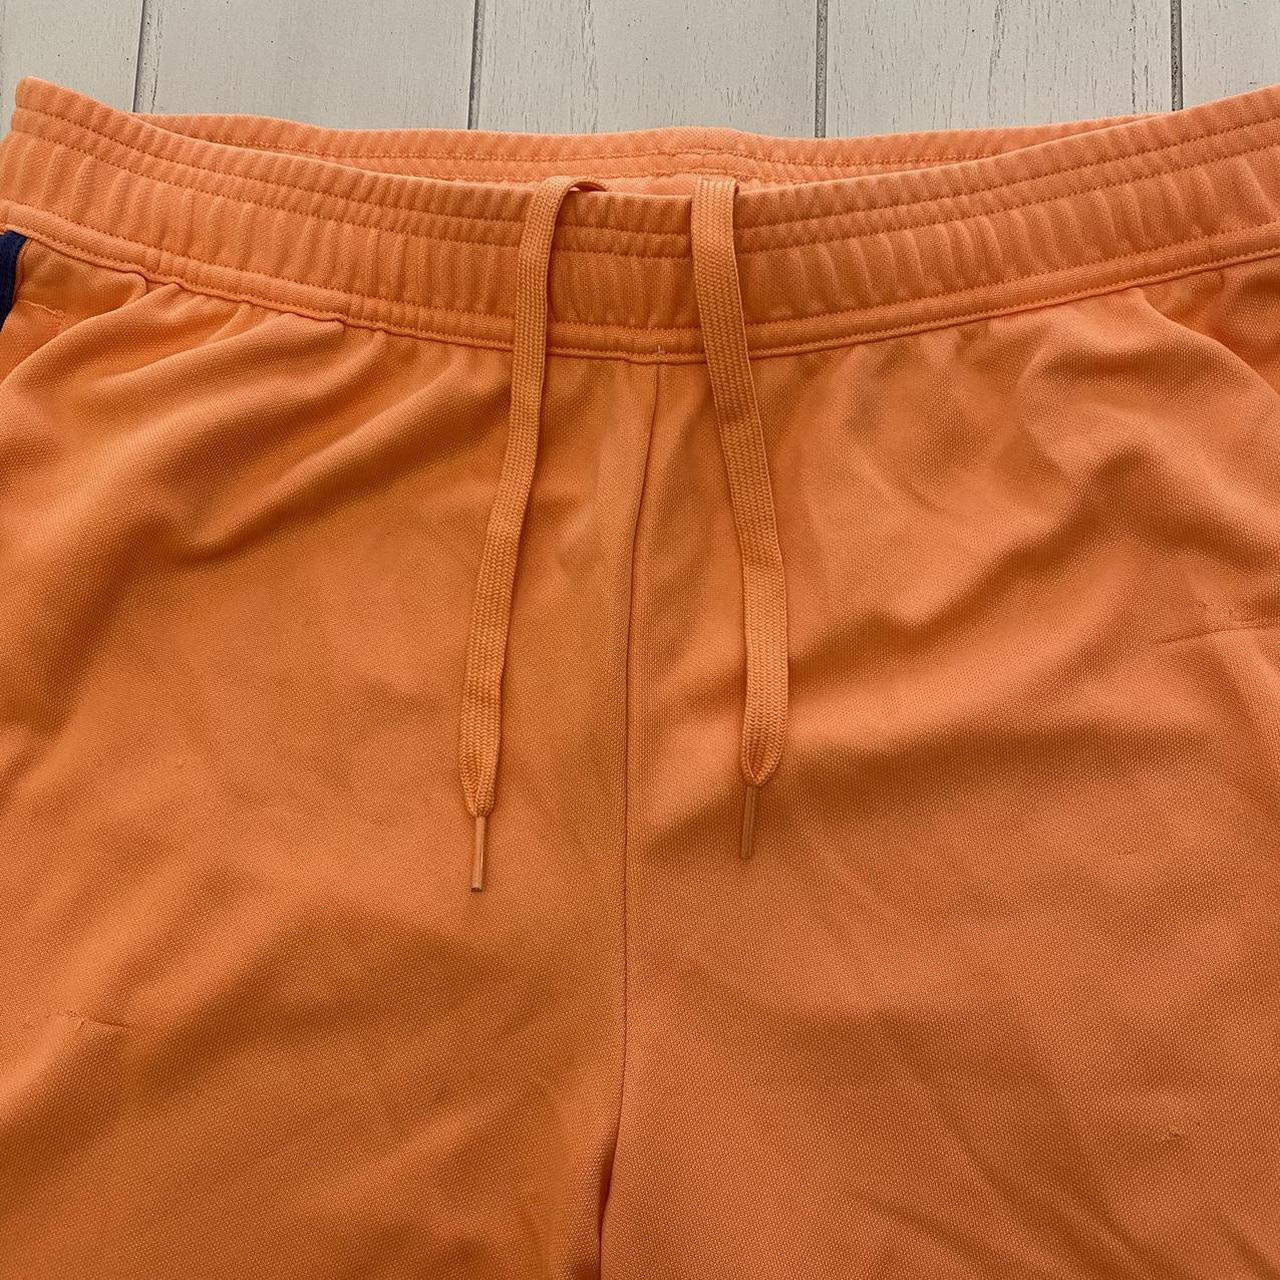 Orange Fitted Sweatpants with Ankle Zips Waist:... - Depop